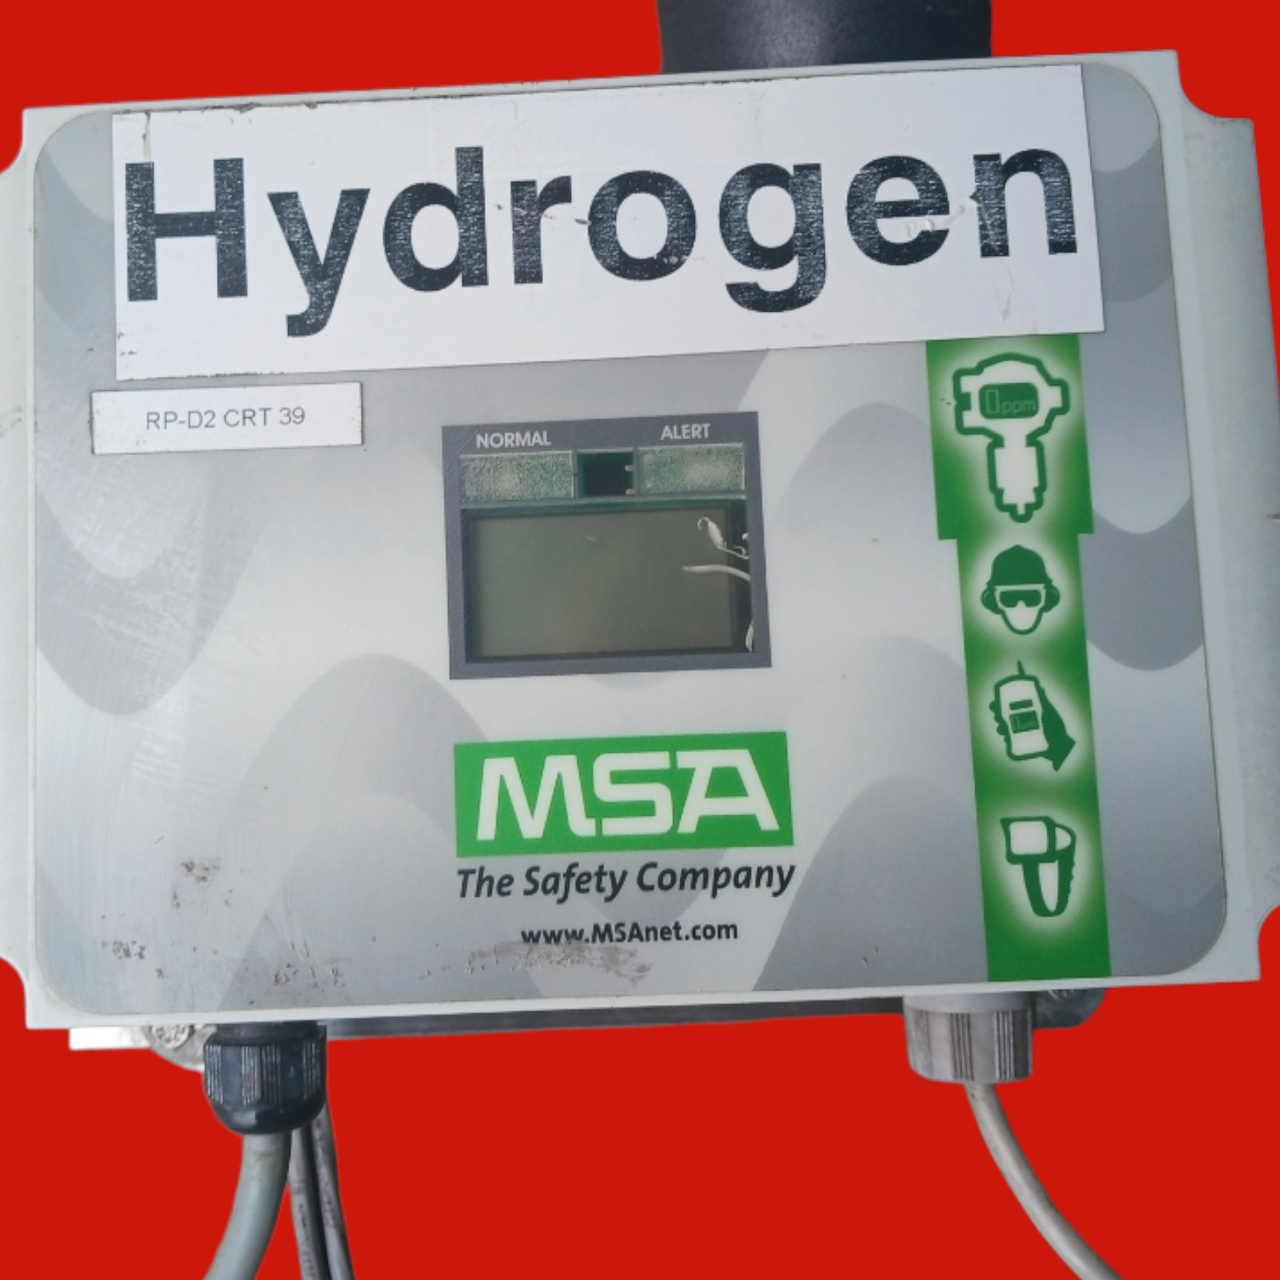 MSA TRIGARD Gas Monitoring System, A-TRIGARD-A-M-1-0-31-5-31-5-31-5-1-2-0